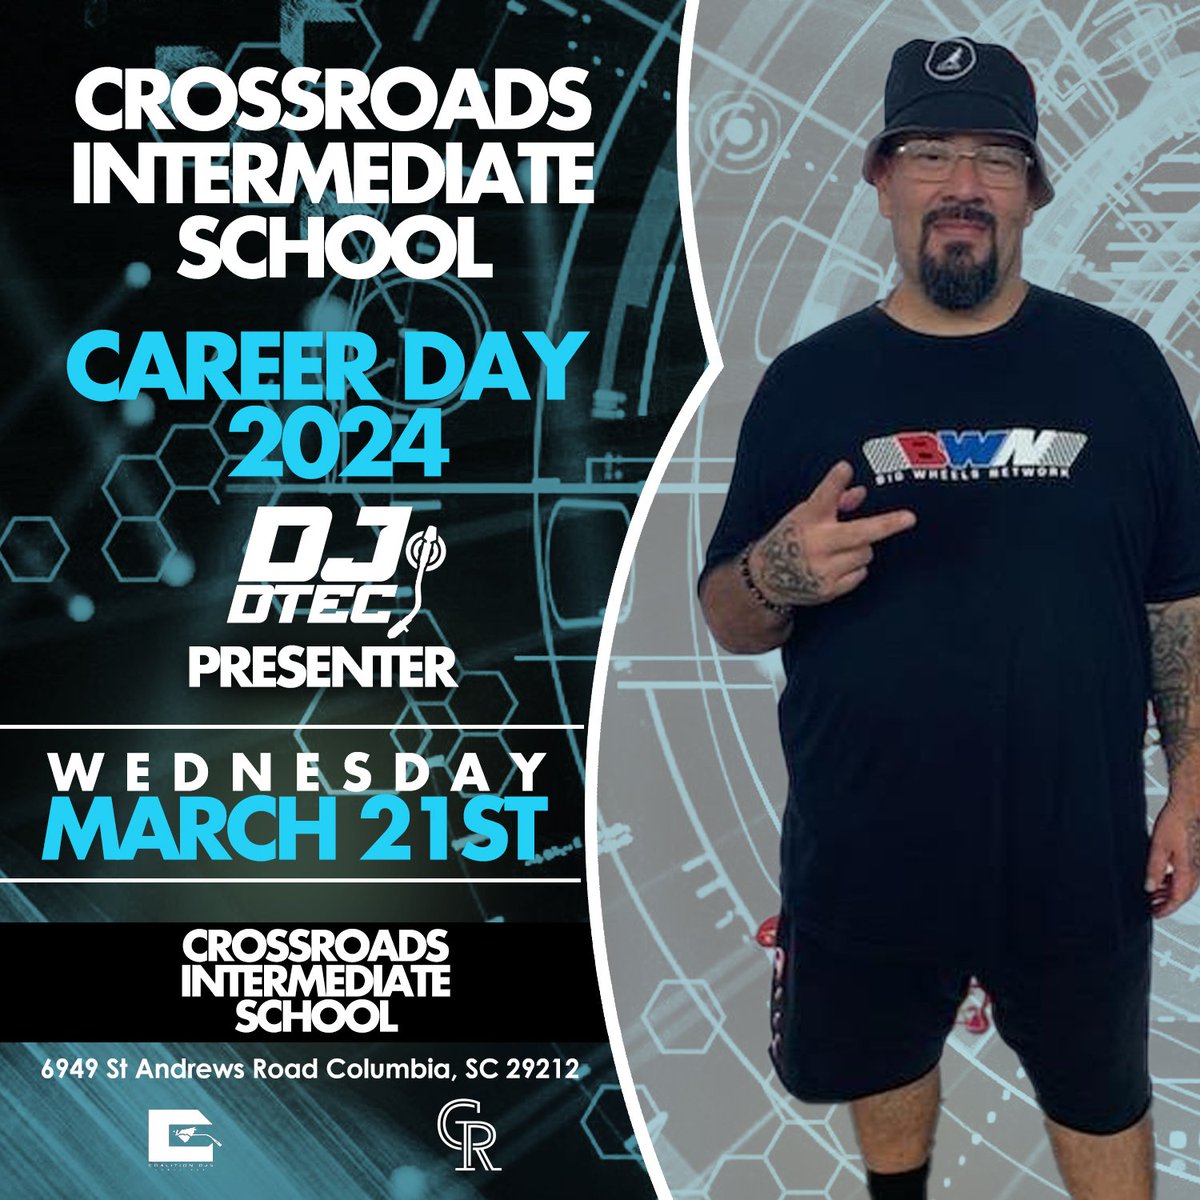 Tomorrow March 21st I'll be at crossroads school for career day